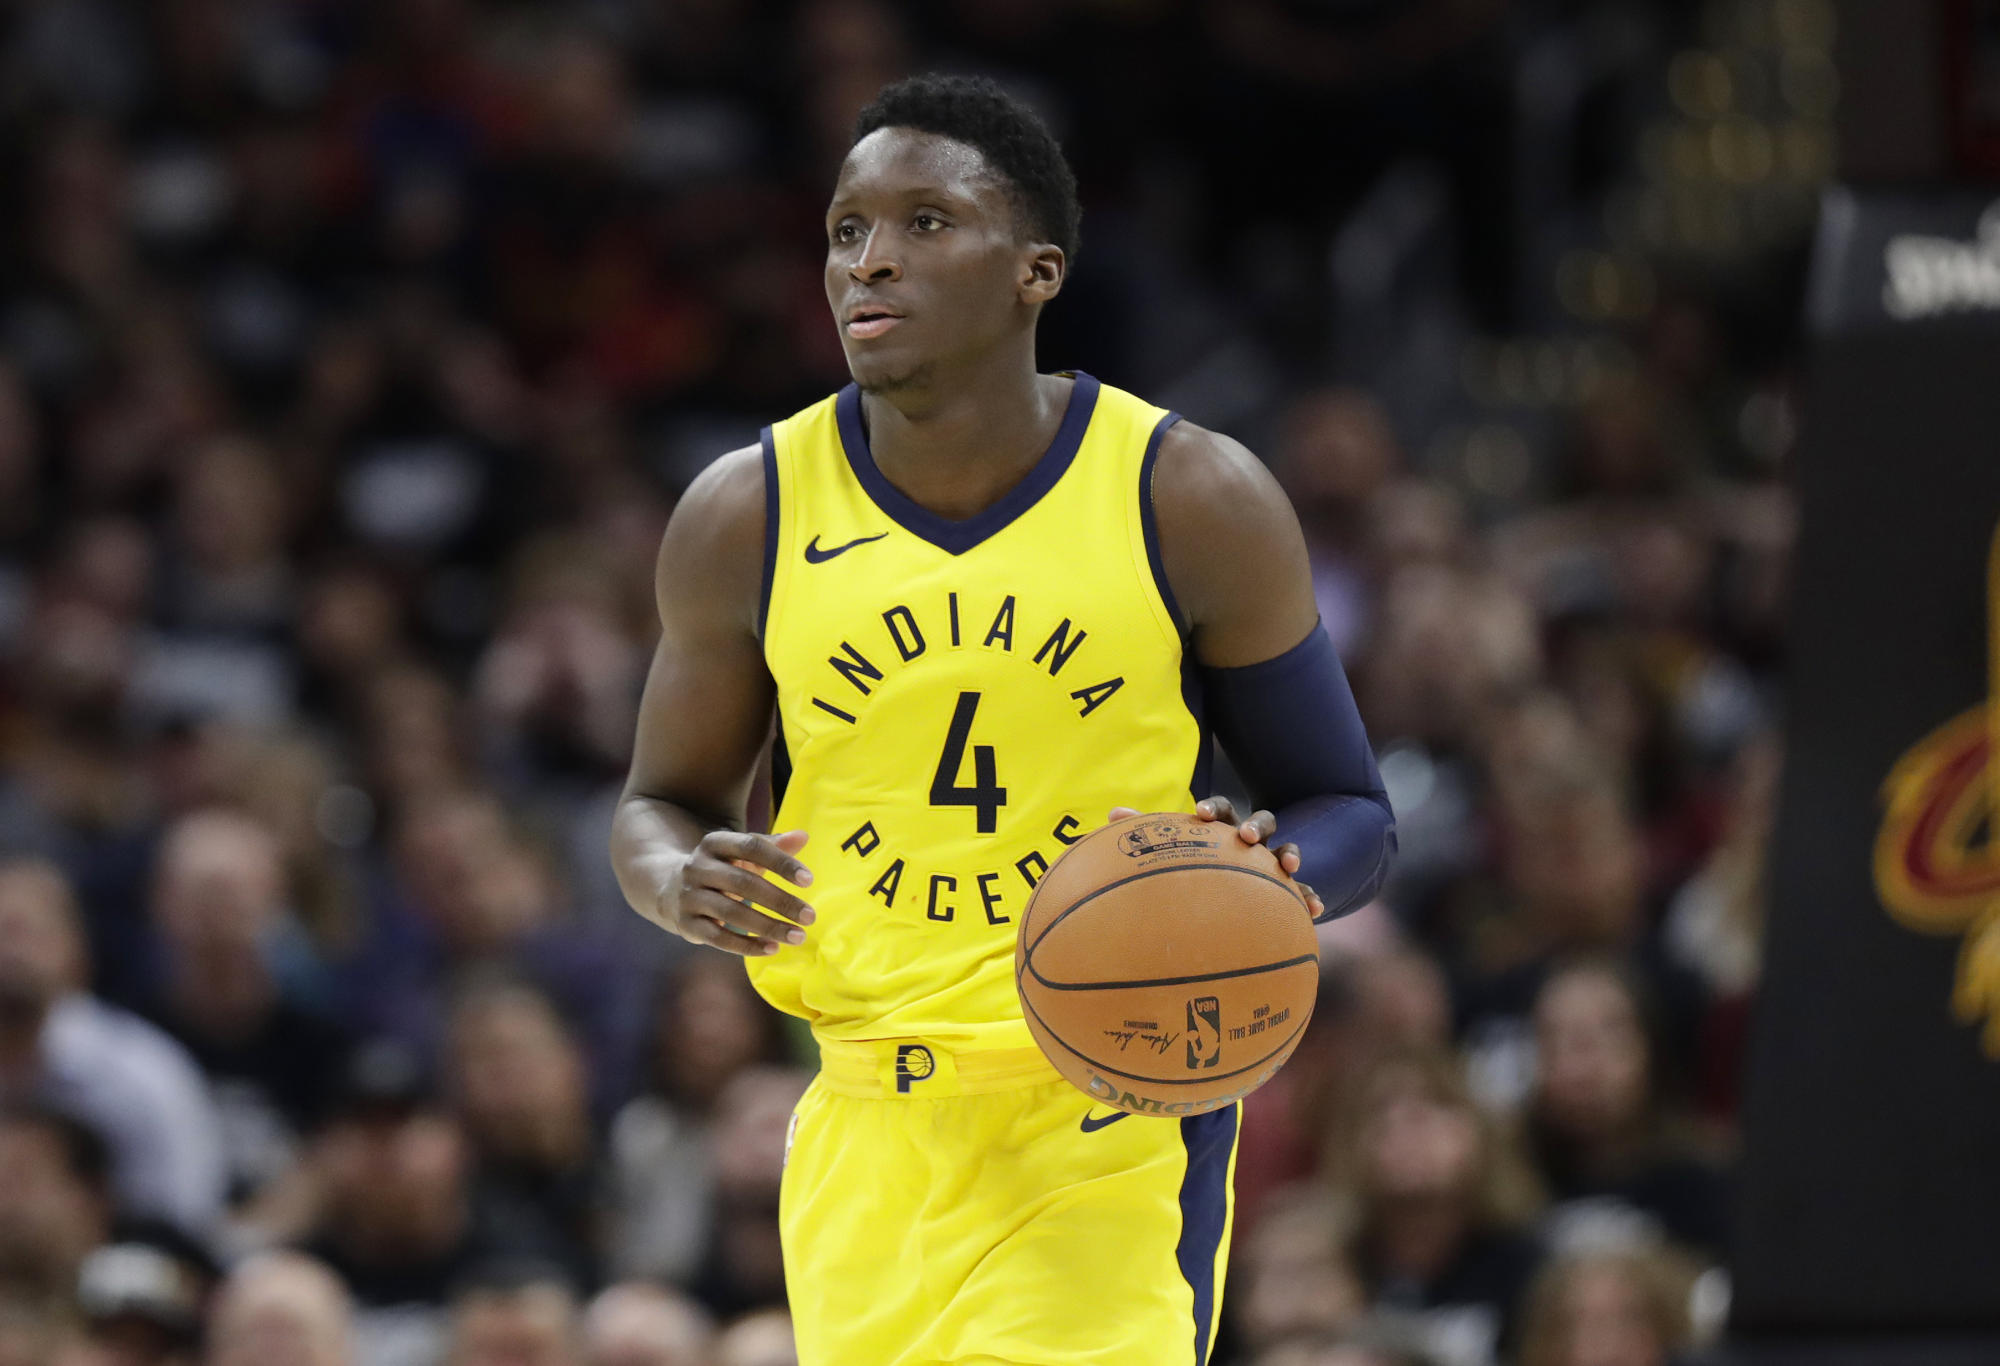 Victor Oladipo dribbles the ball